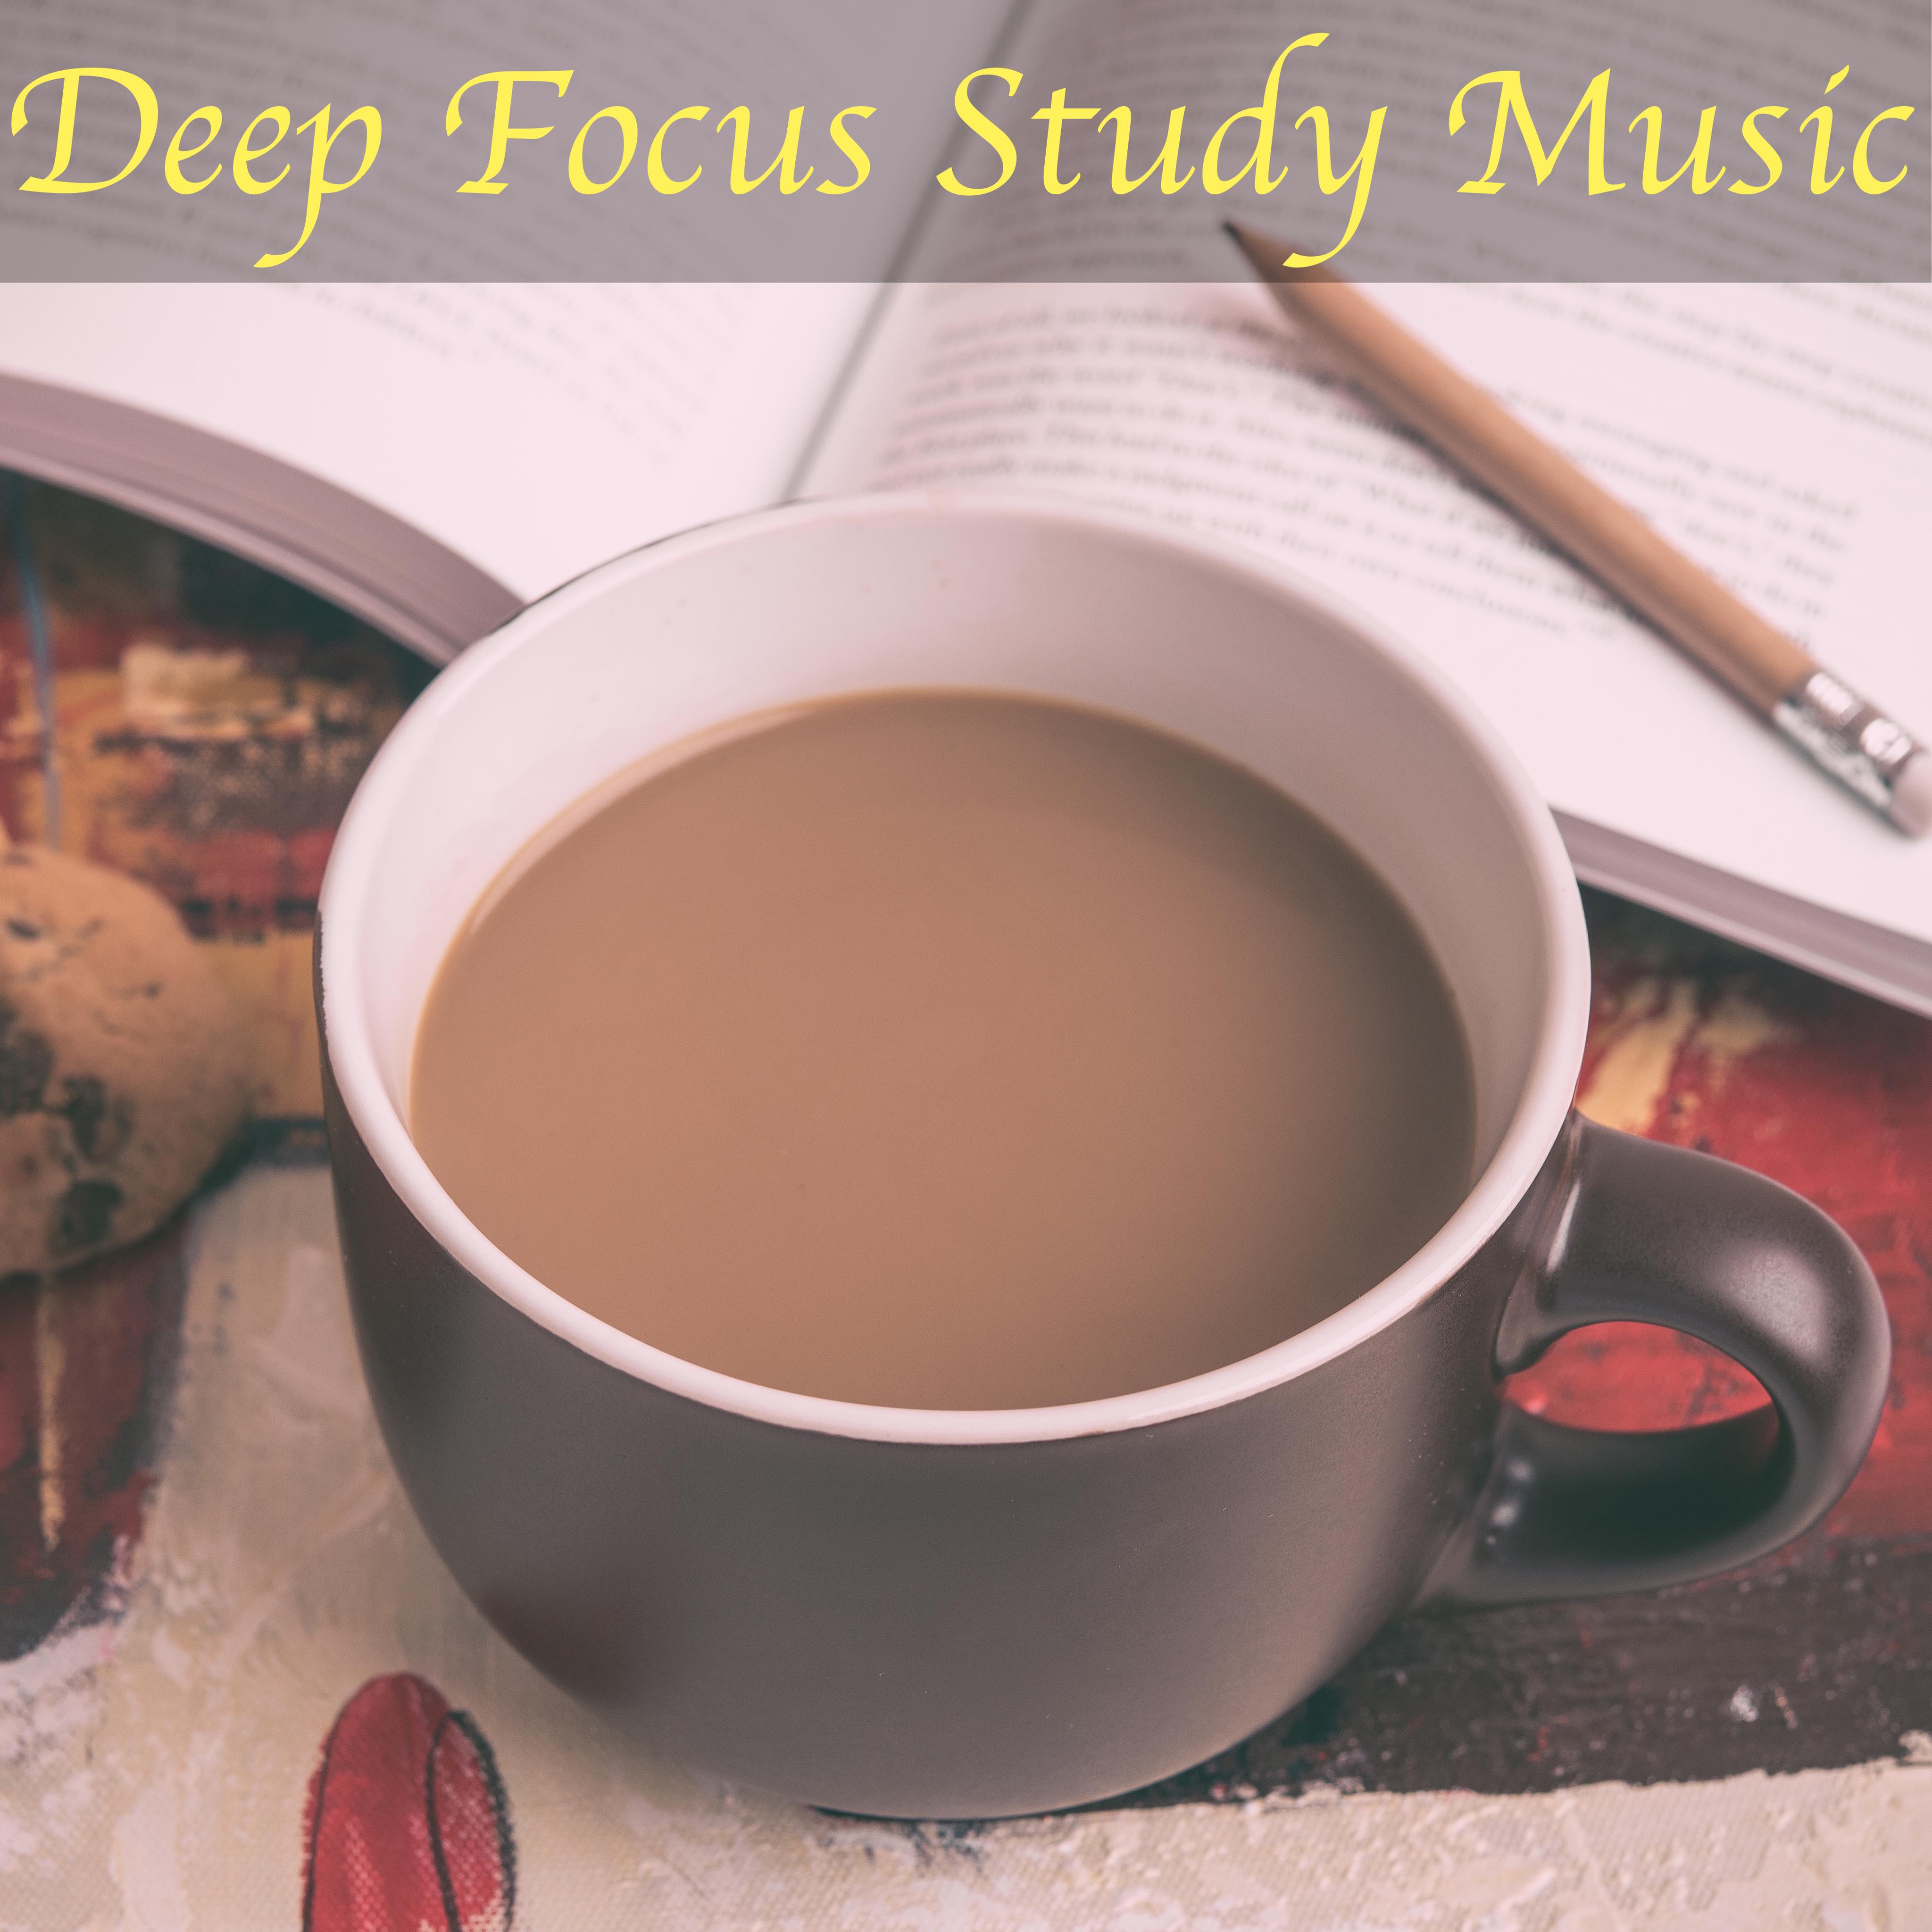 Deep Focus Study Music - Motivate Yourself for Exams, Study Inspiration, Mindfulness and Meditation, Relaxing Nature Sounds